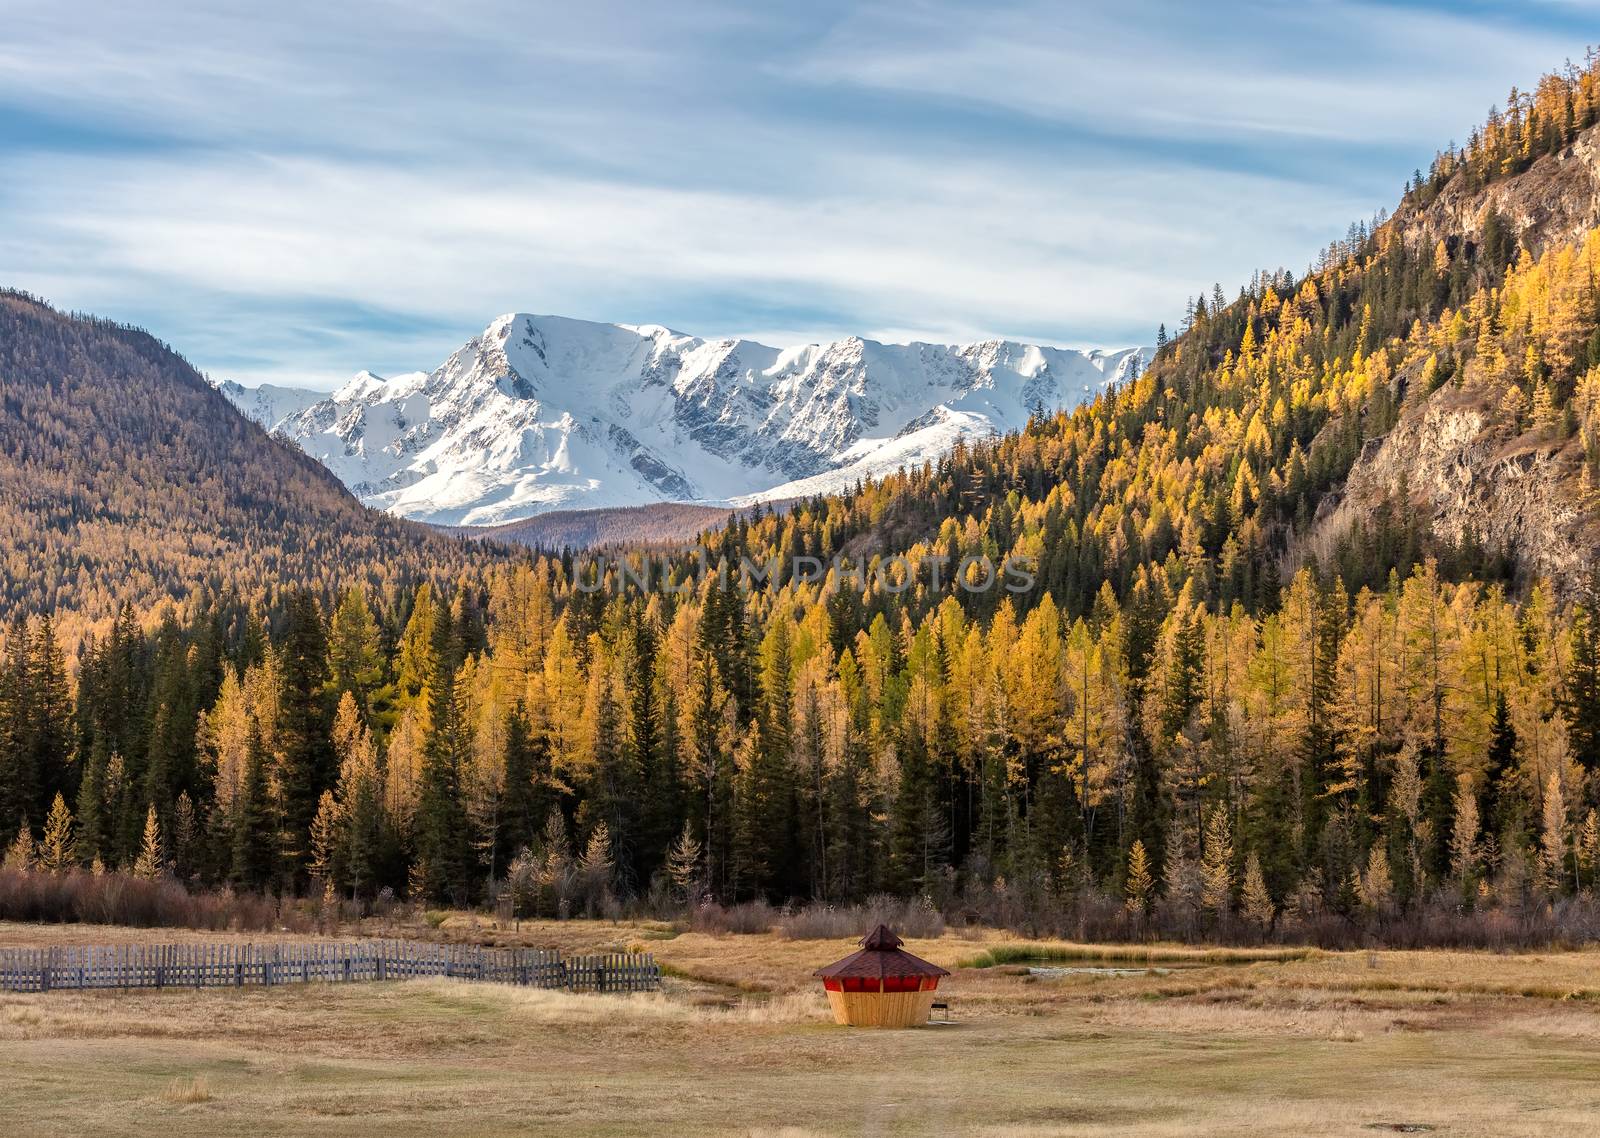 Scenic low angle view of snowy mountain peaks and slopes of North Chuyskiy ridge. Golden trees, wooden hut in the foreground. Beautiful blue cloudy sky as a backdrop. Altai mountains, Siberia, Russia by DamantisZ